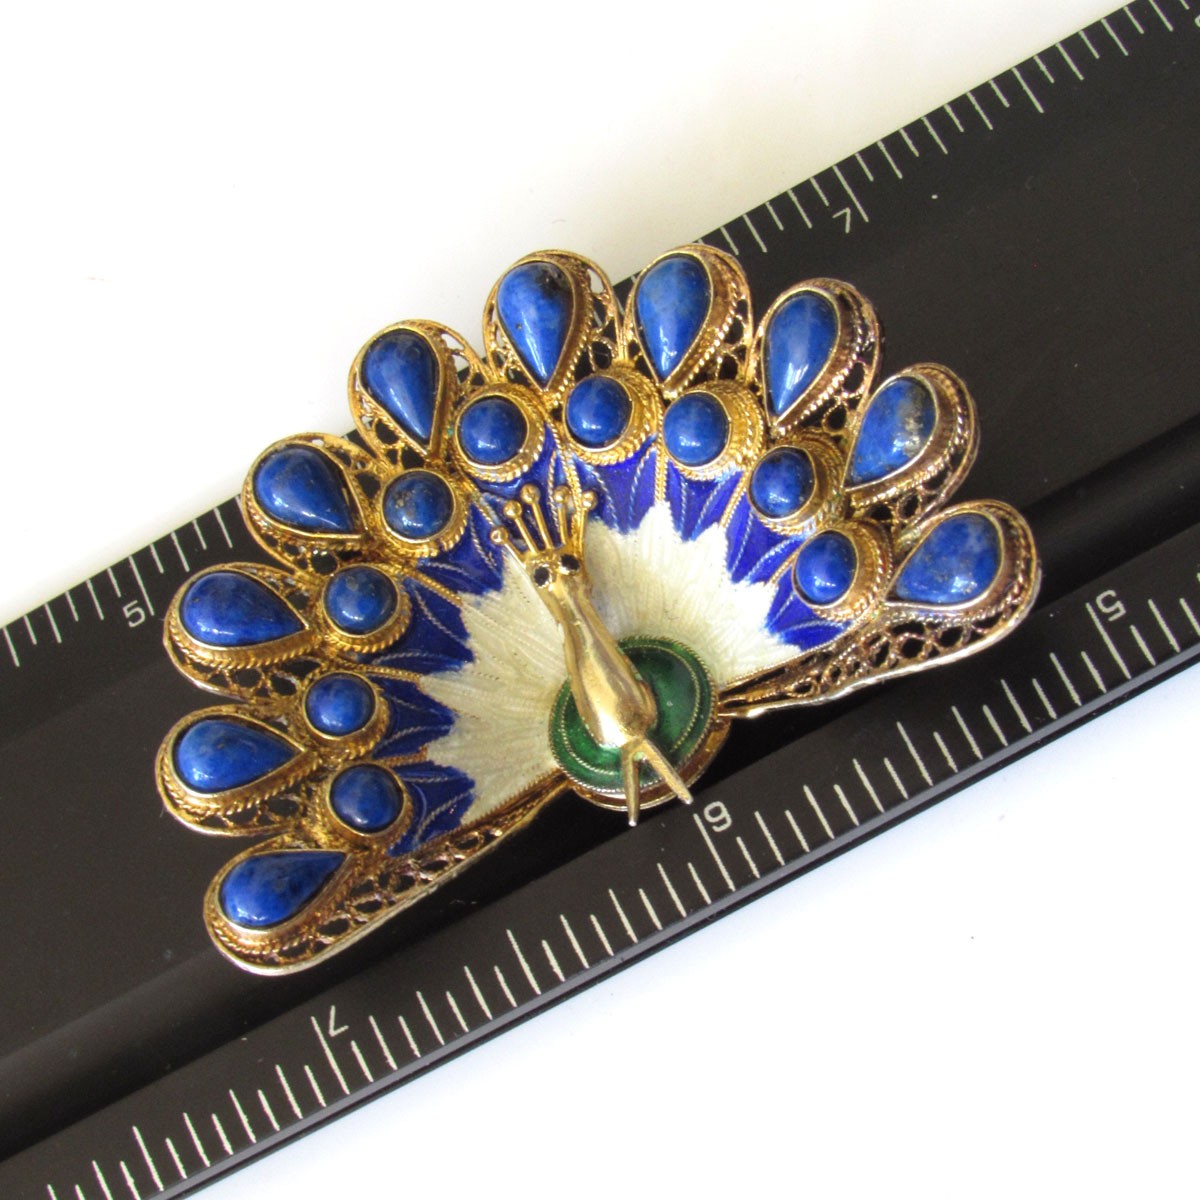 *SALE* Chinese Export Gilt Sterling Silver Lapis Enameled Peacock Pin